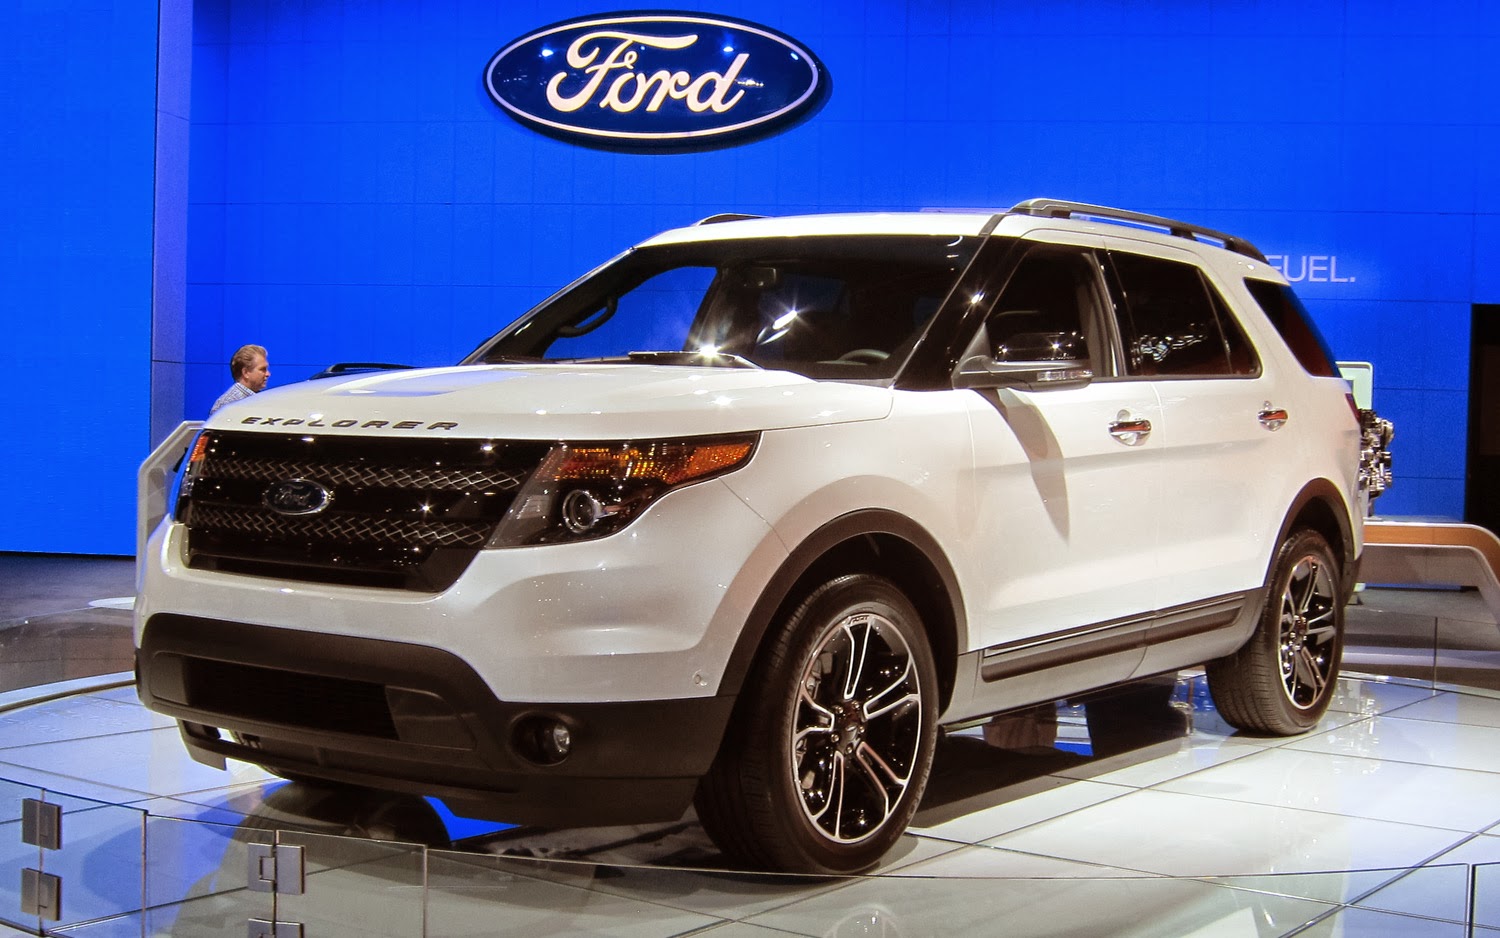 2014 Ford Explorer Release Date, Redesign & Price